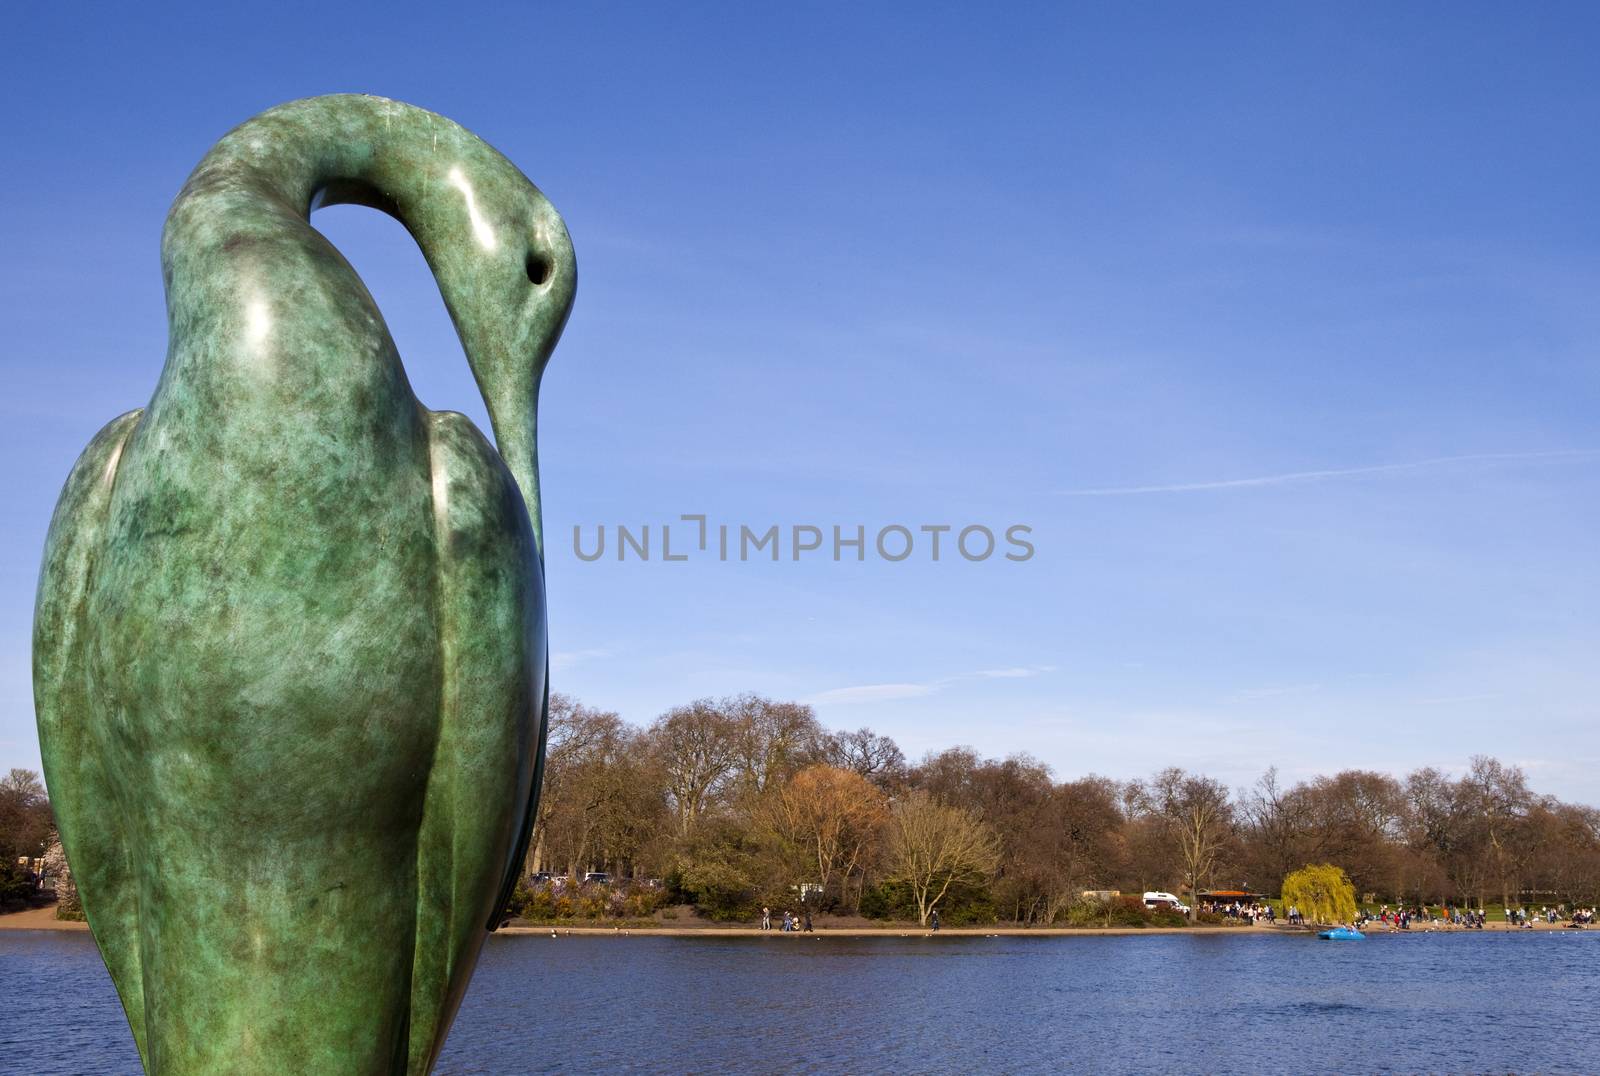 The beautiful Isis sculpture by the Serpentine in London's Hyde Park.